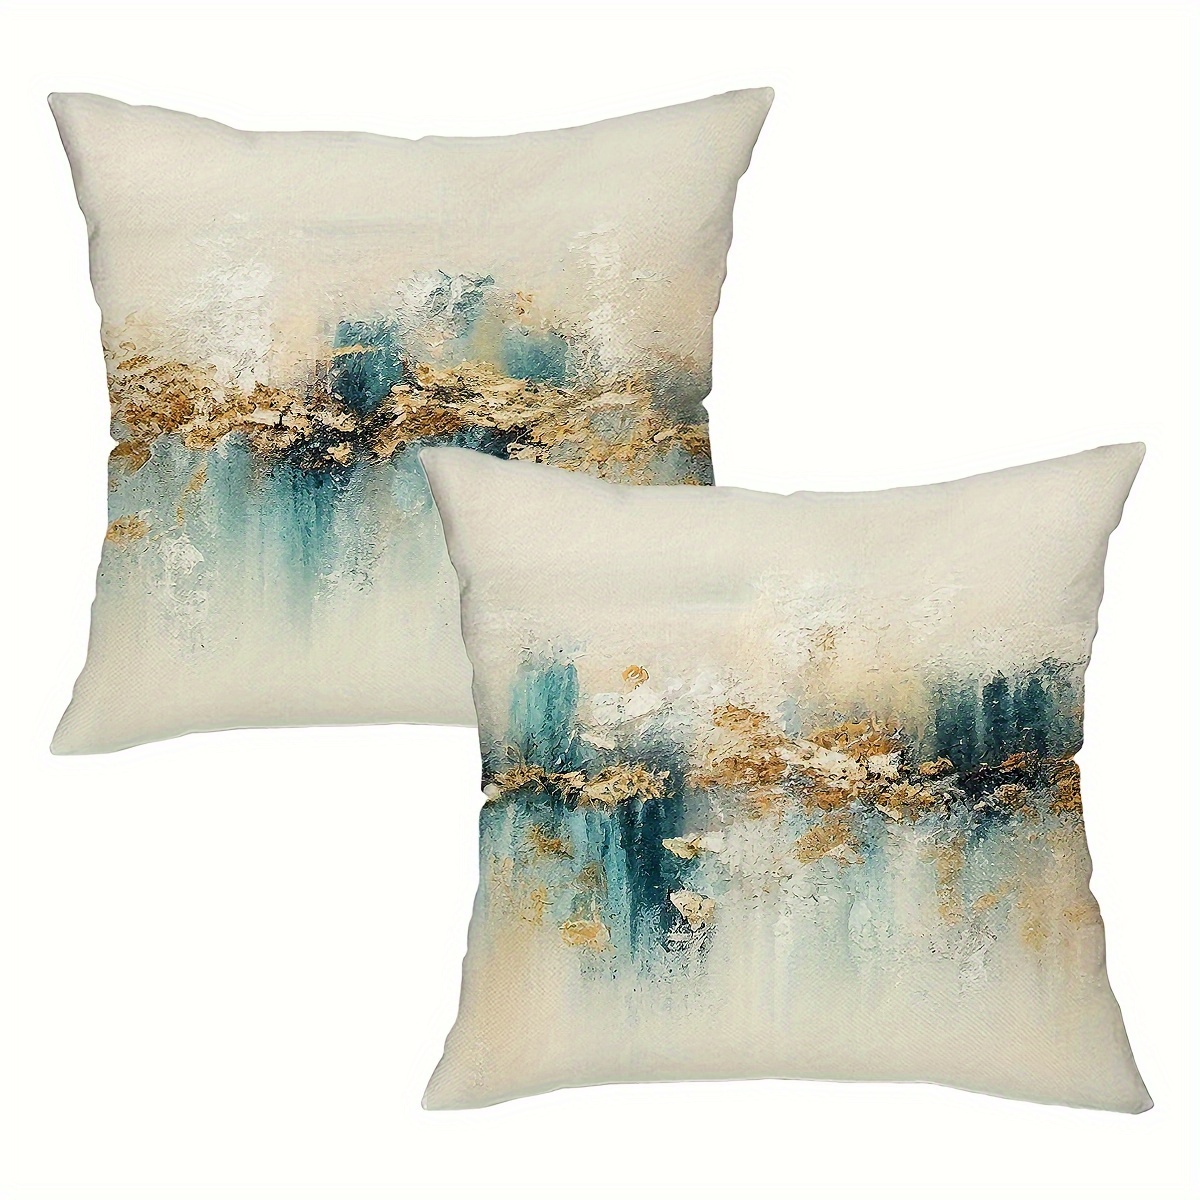 

2-piece Bohemian Abstract Art Throw Pillow Covers - Stylish Linen Blend, Zip Closure For Living Room, Bedroom & Car Decor